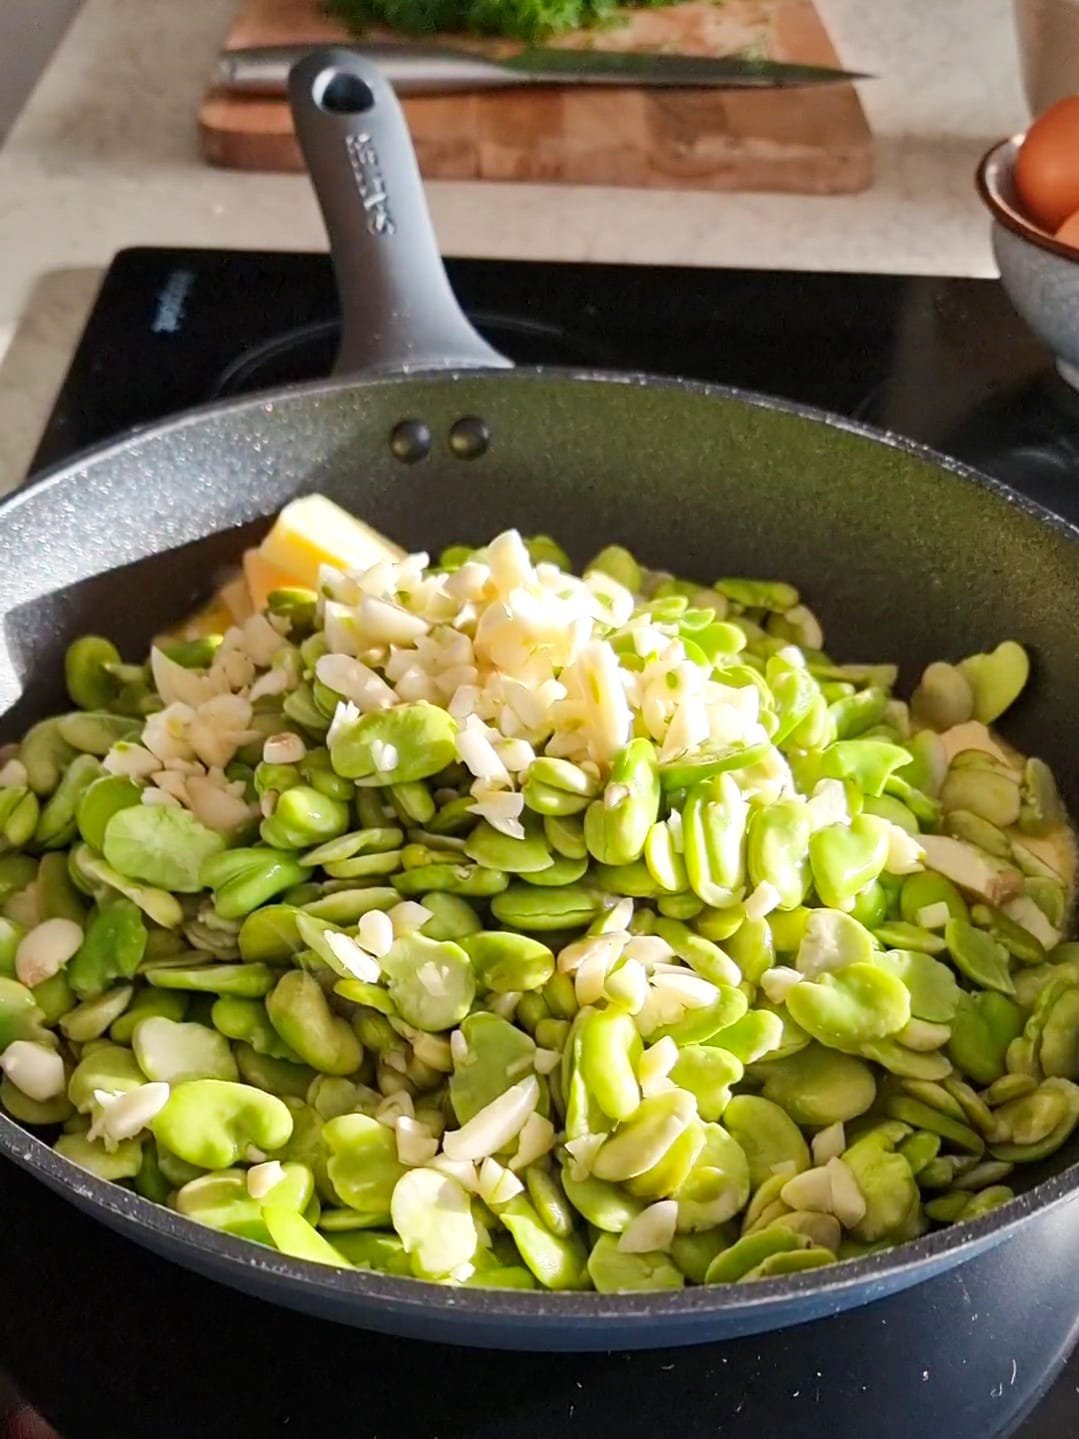 the green fava beans combined with garlic in a pan